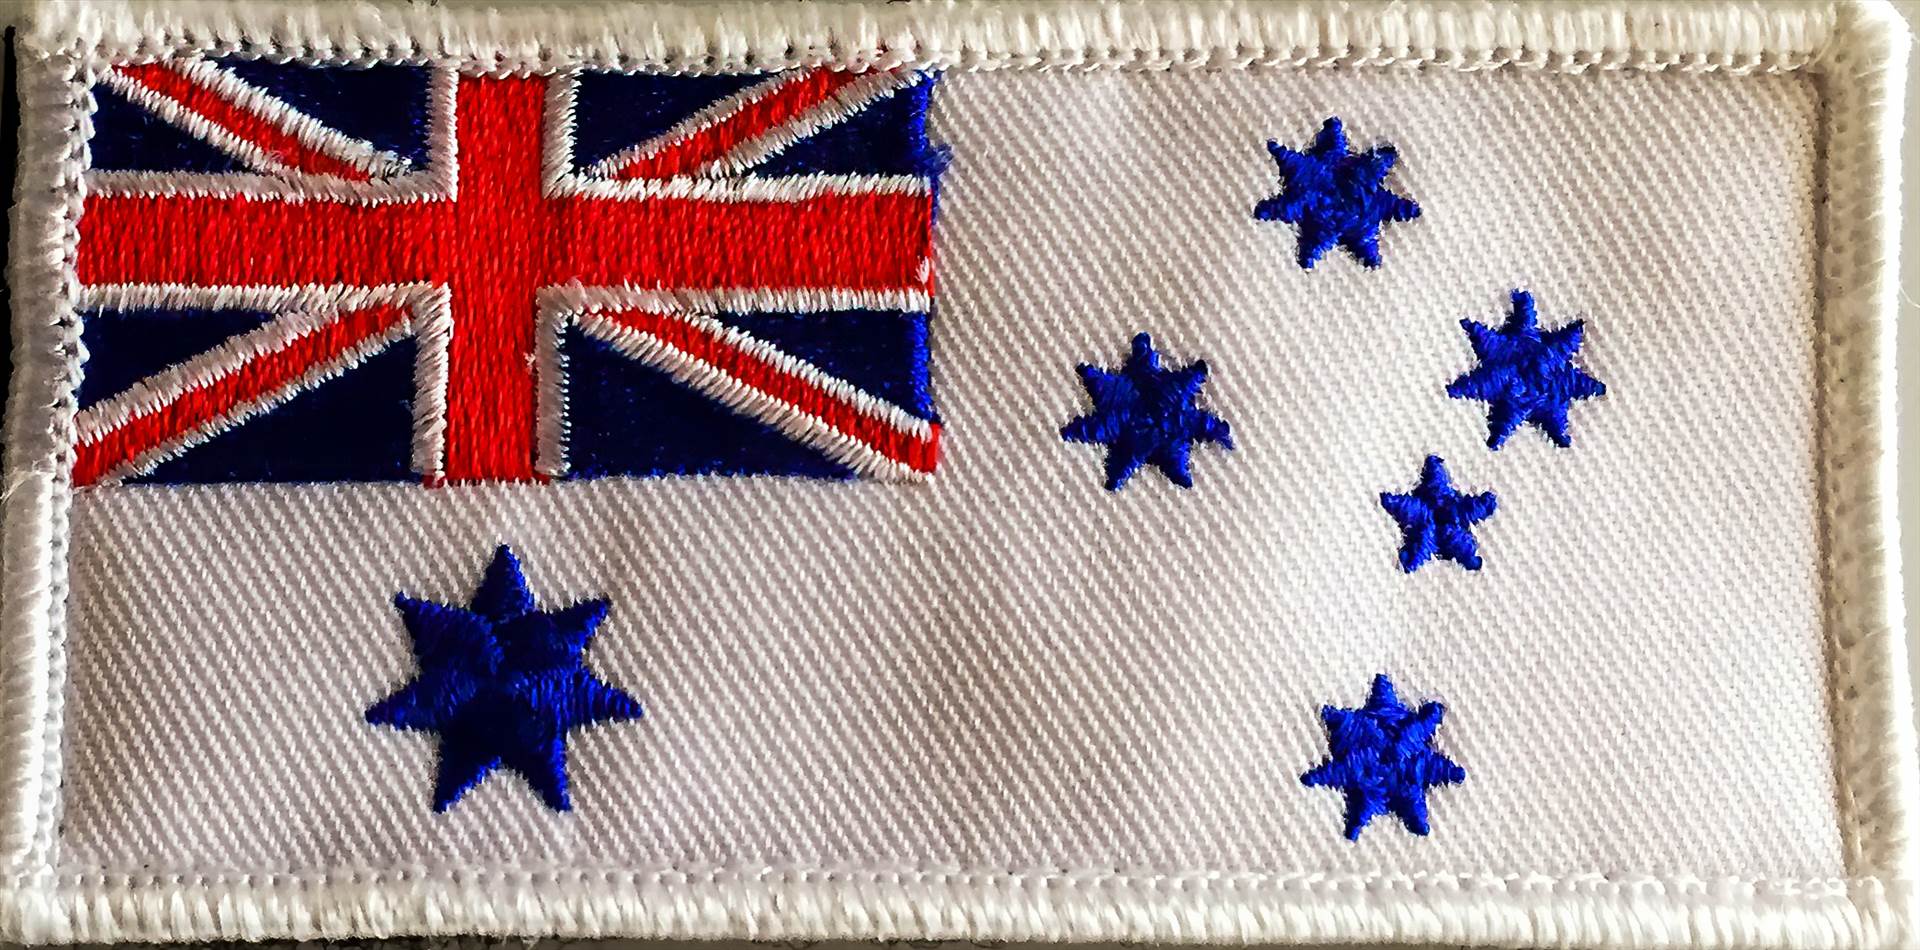 Royal Australian Navy Ensign embroidered Royal Australian Navy RAN Ensign on DPNU Embroidered Patch by johntorcasio